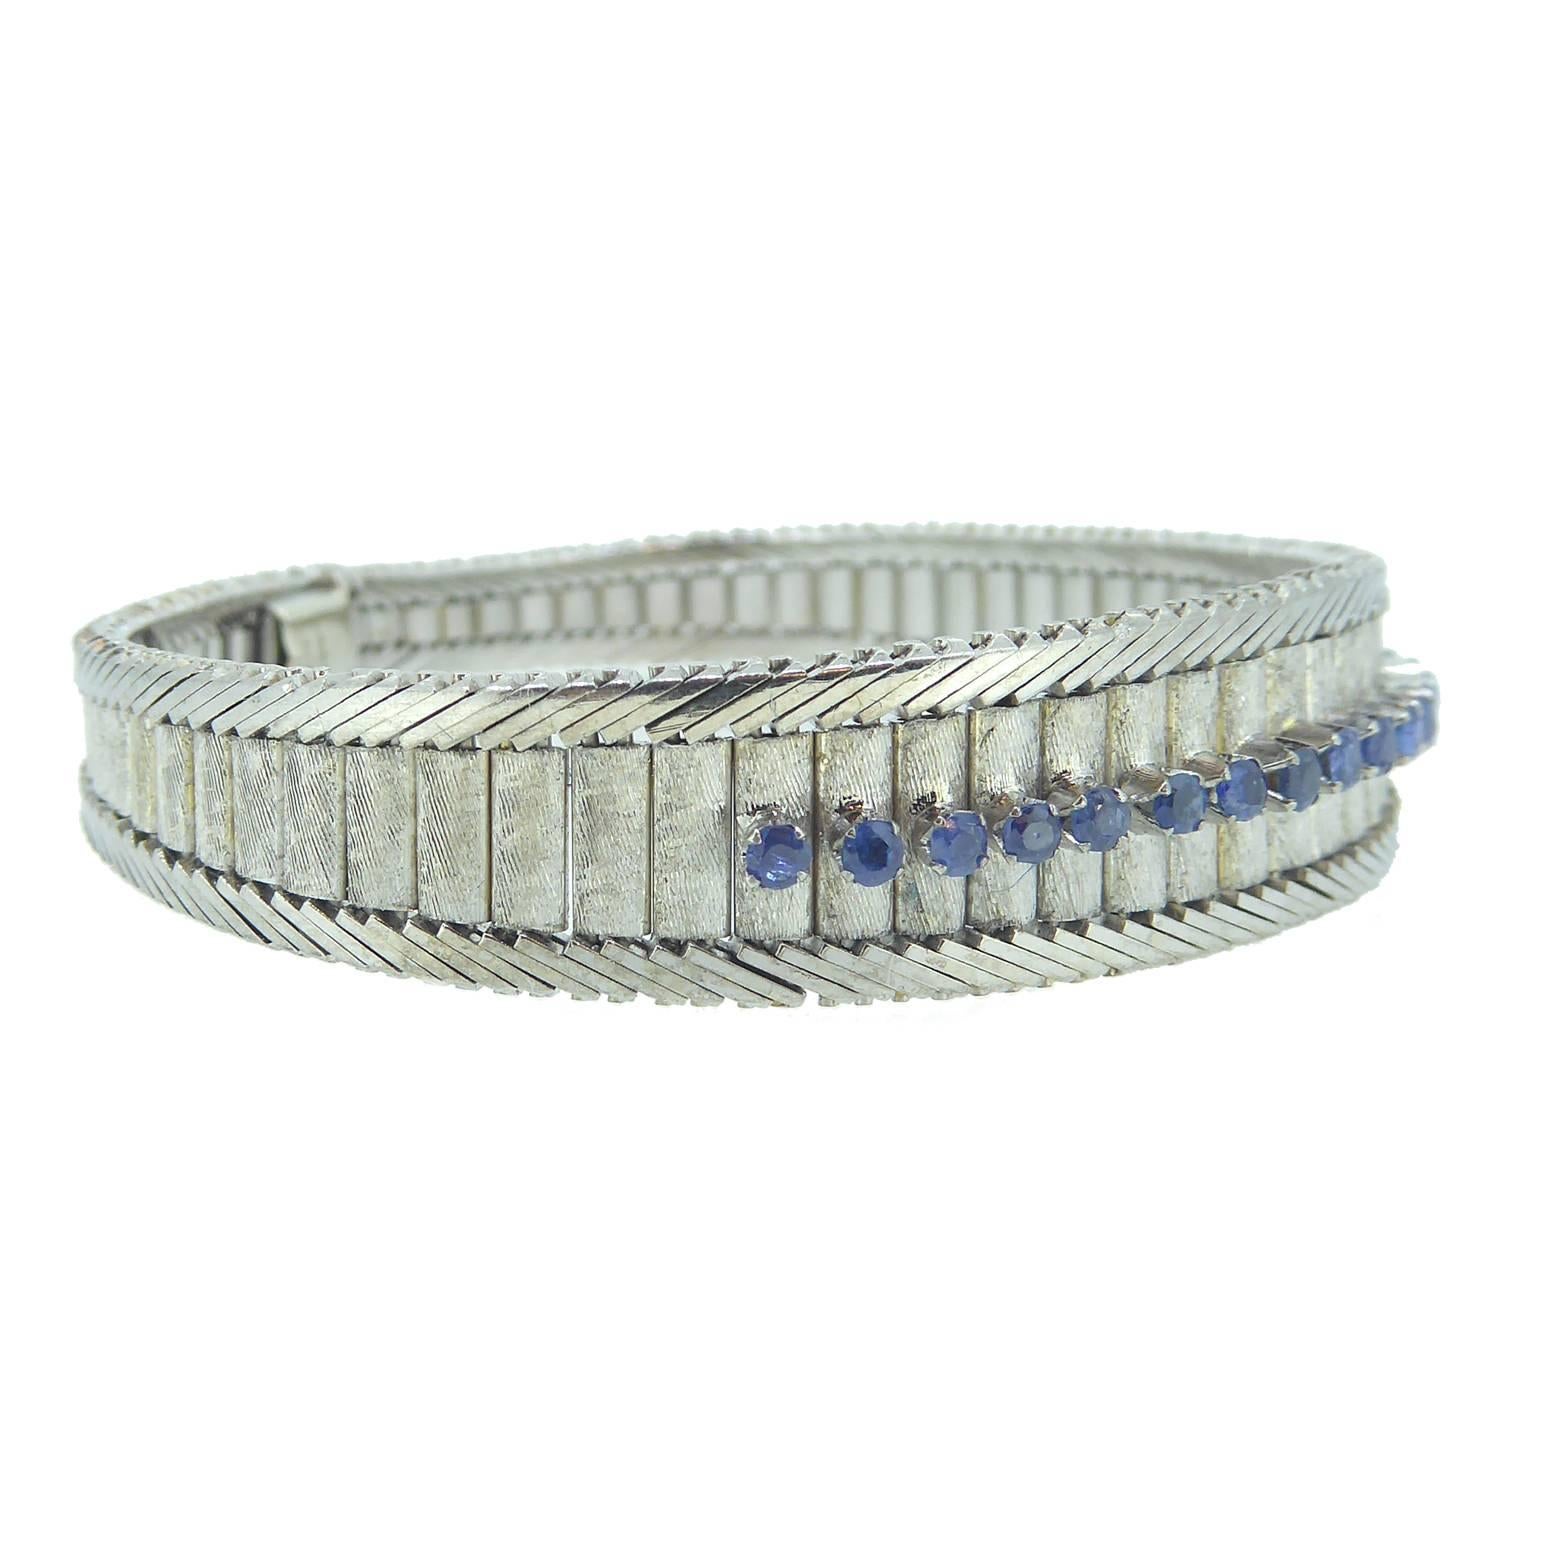 Perfect for evening or smart day wear and a pretty alternative to a diamond line bracelet.

A sapphire line bracelet in 18ct white gold with a plain polished and brushed finish comprising rectangular white links with a brushed finish measuring from